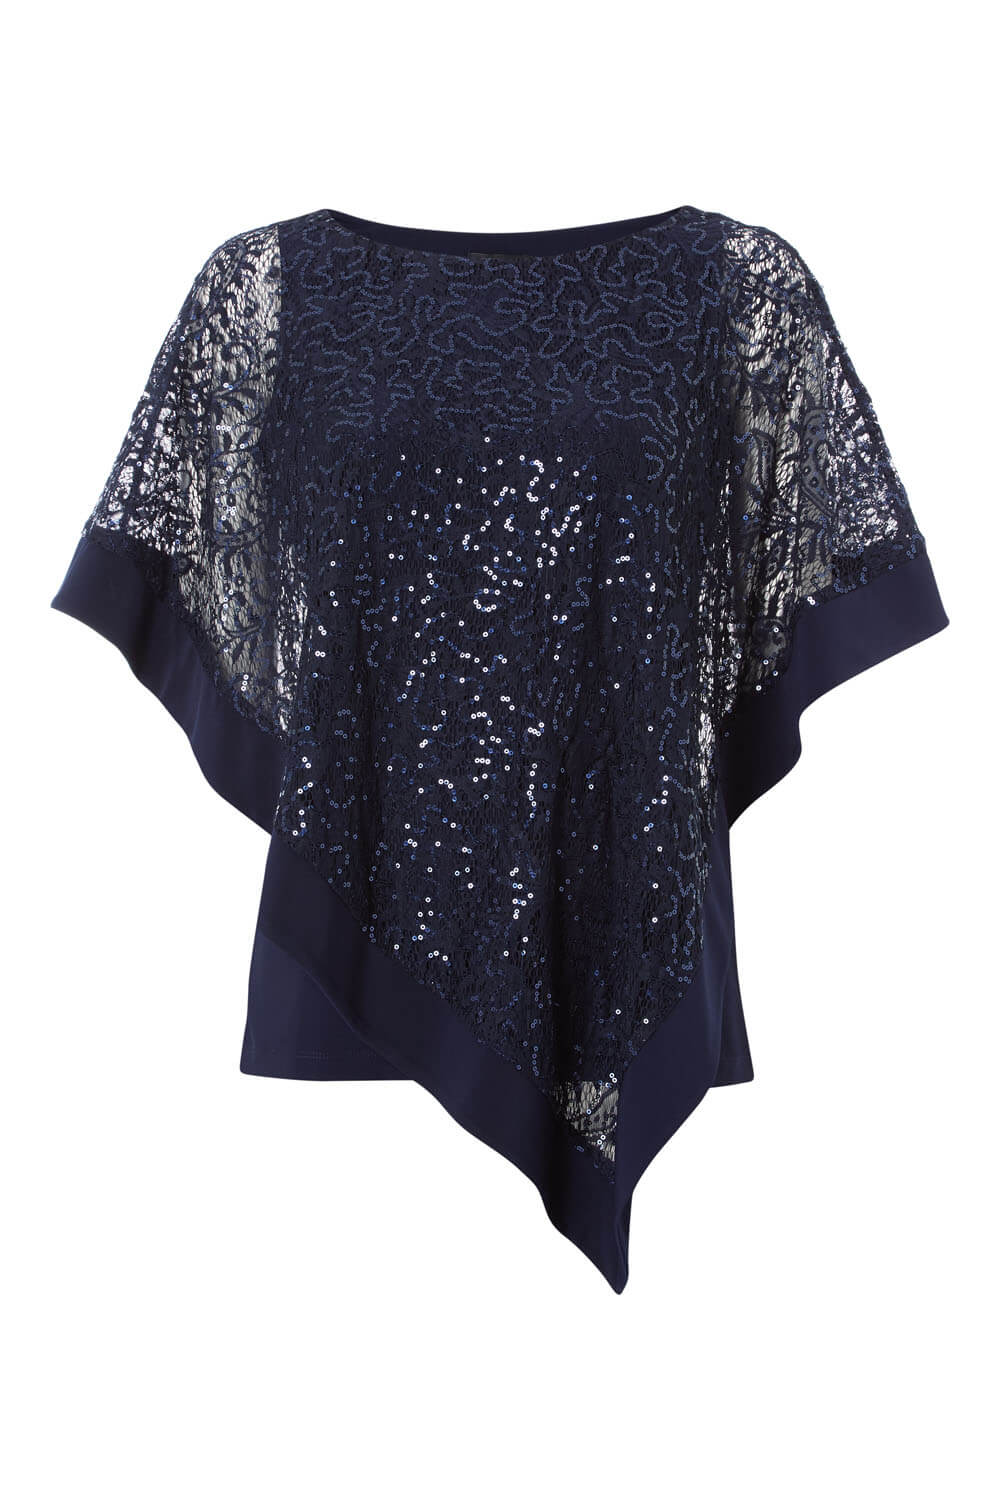 Midnight Blue Sequin Embellished Overlay Top, Image 5 of 5